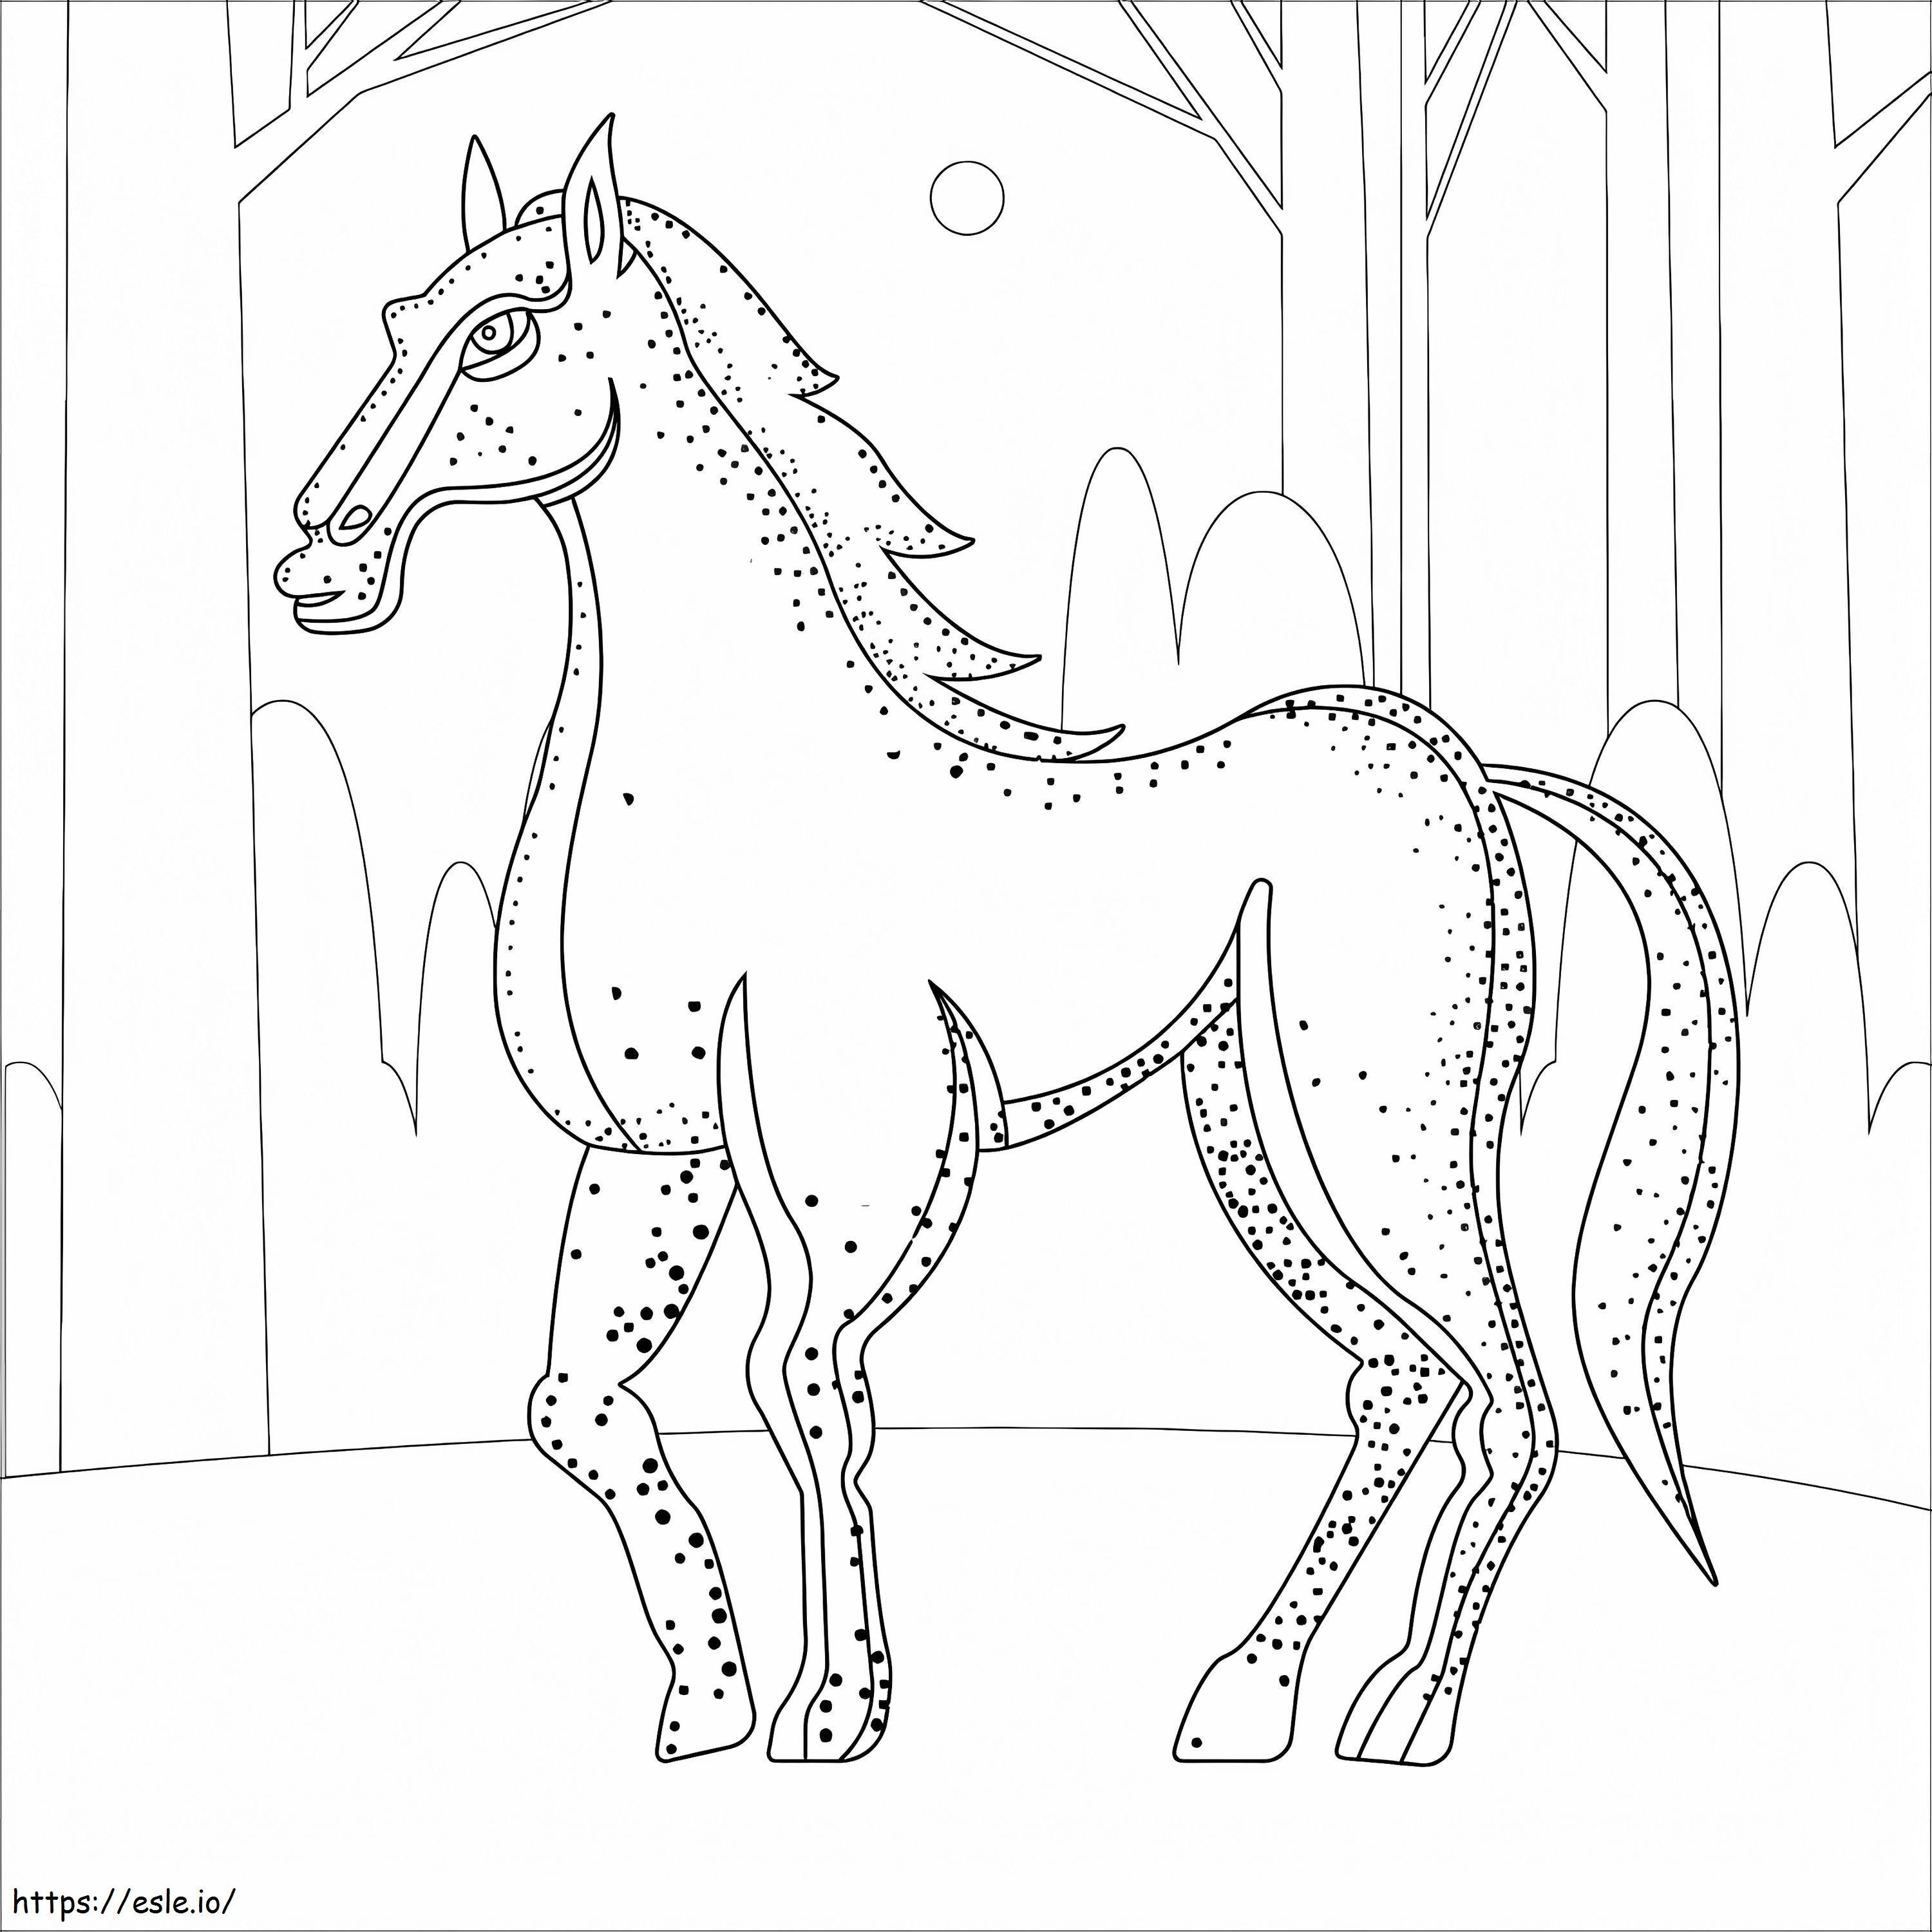 Horse In The Forest coloring page